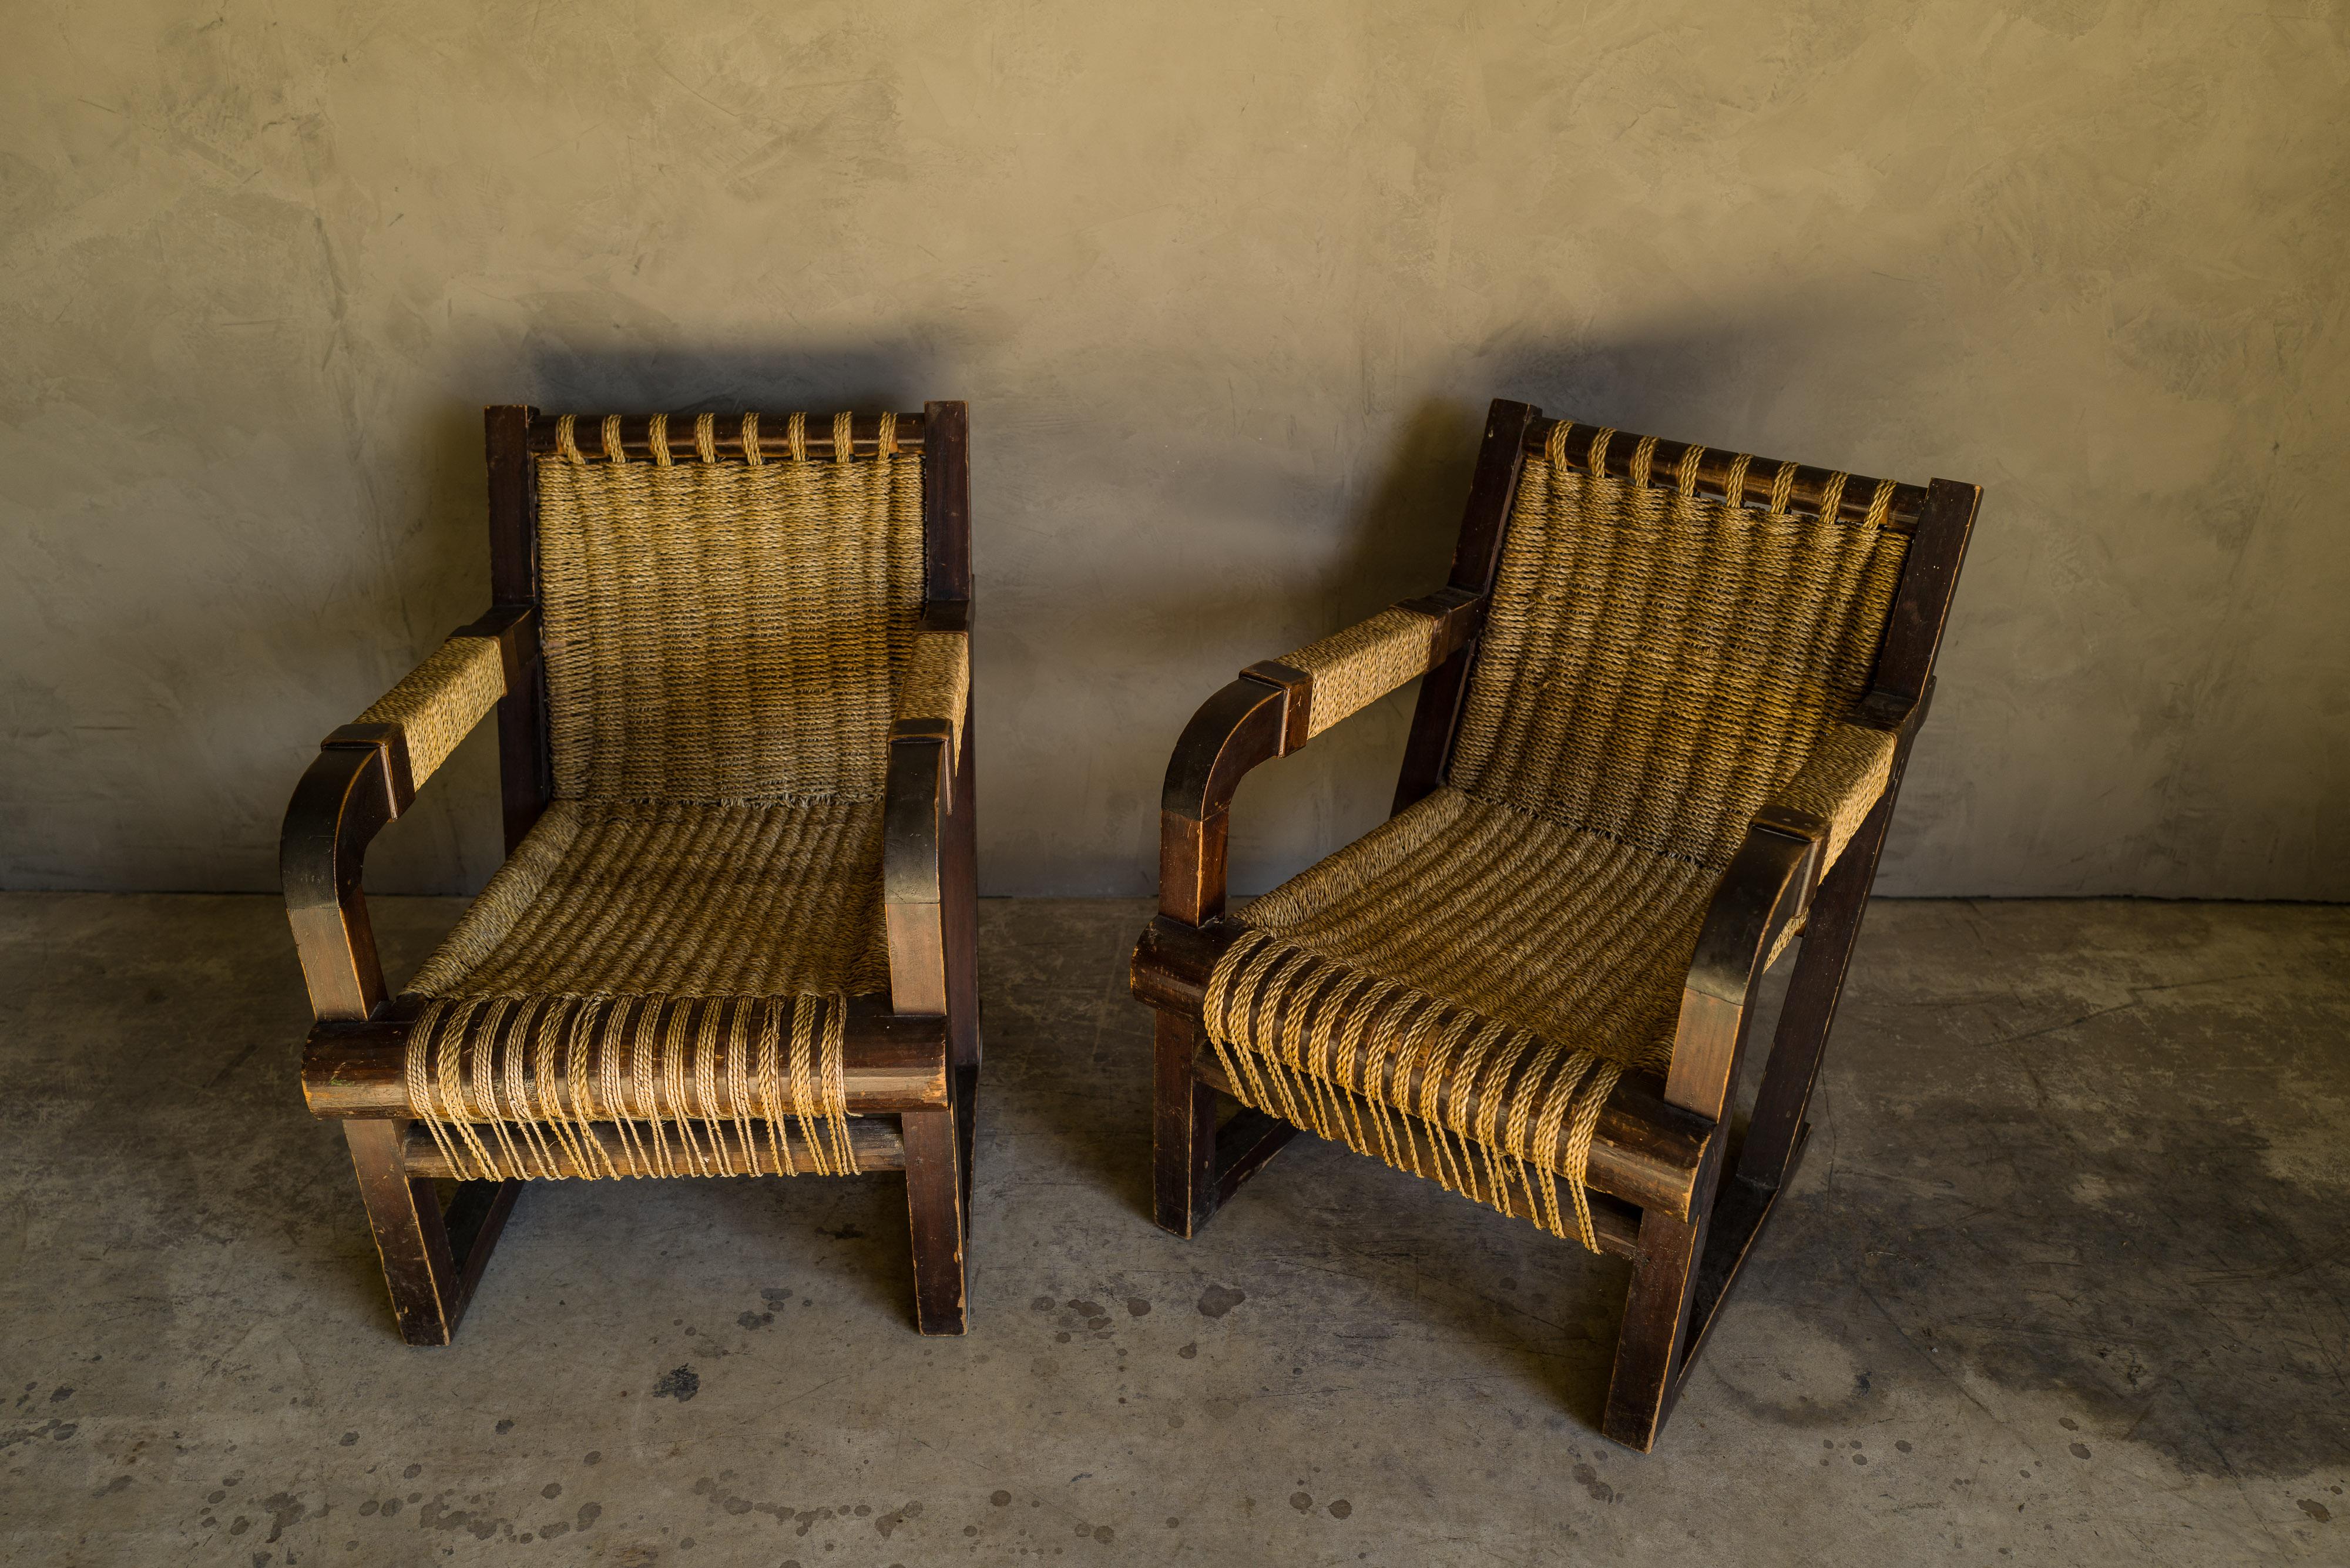 Rare pair of woven lounge chairs from France, circa 1960. Rare model often attributed to Francis Jourdain. Nice wear and patina.